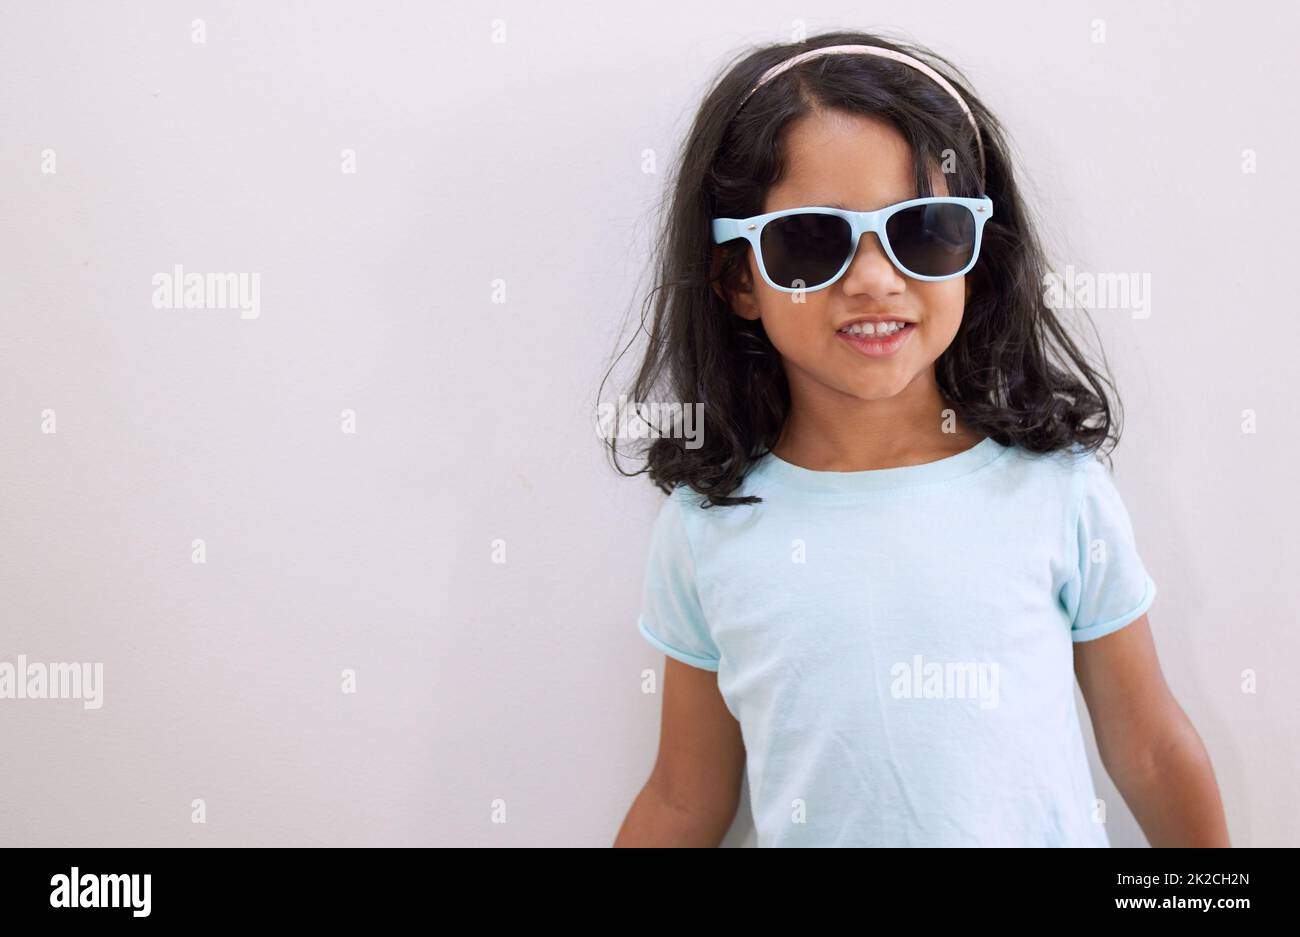 Mom says Im the coolest kid on the block. Shot of an adorable little girl wearing sunglasses while standing against a wall. Stock Photo